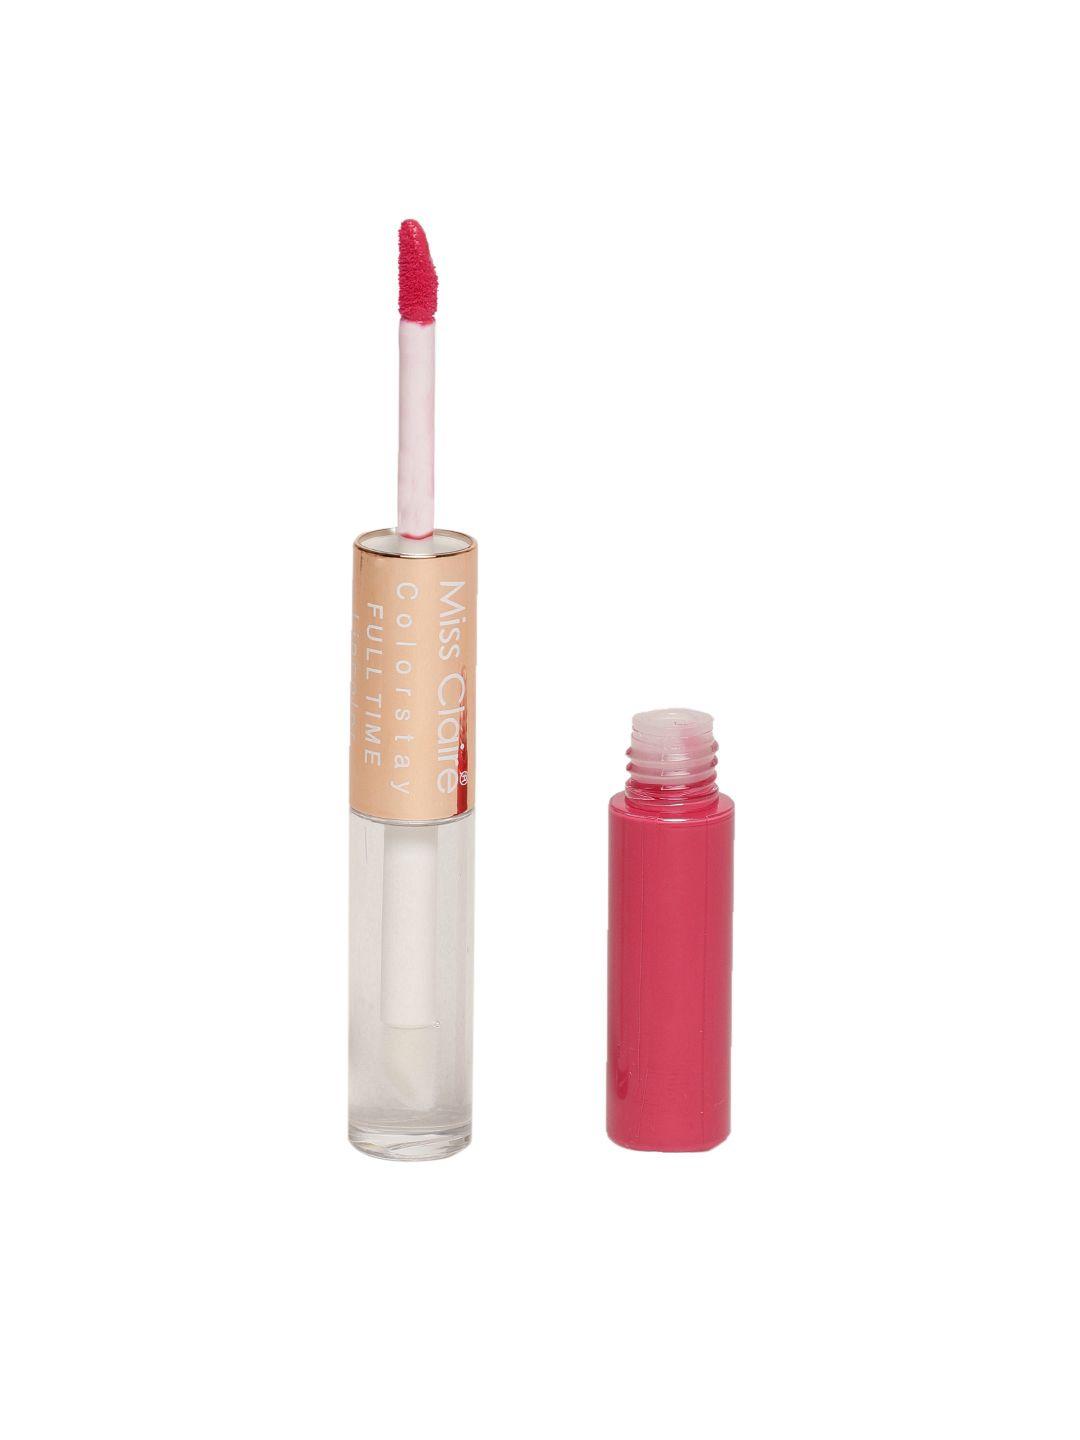 miss-claire-colorstay-full-time-19-lipcolor-10-ml